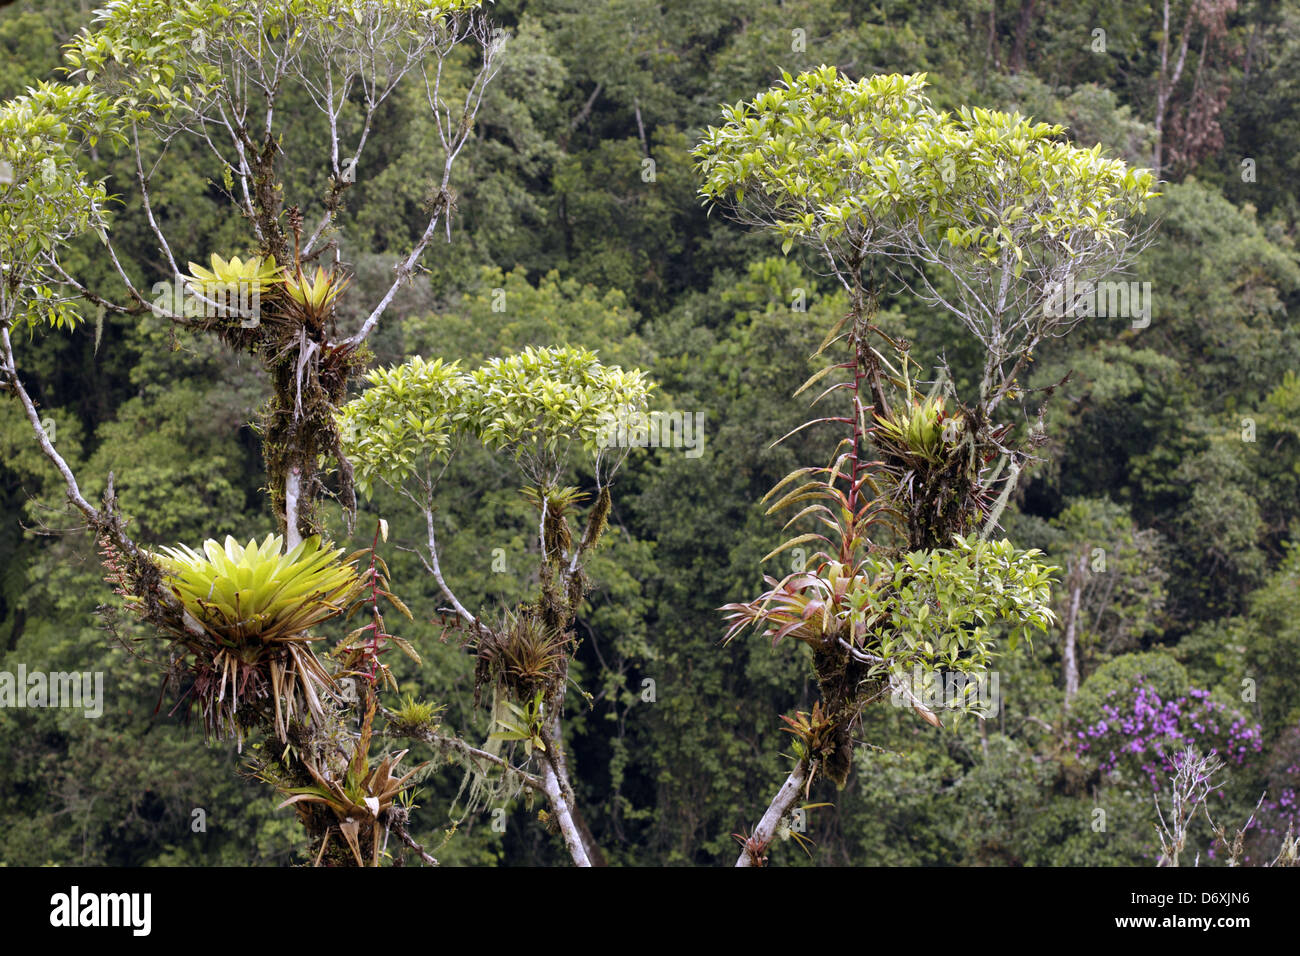 Cloudforest on an Andean hillside with bromeliads and other epiphytes. Stock Photo